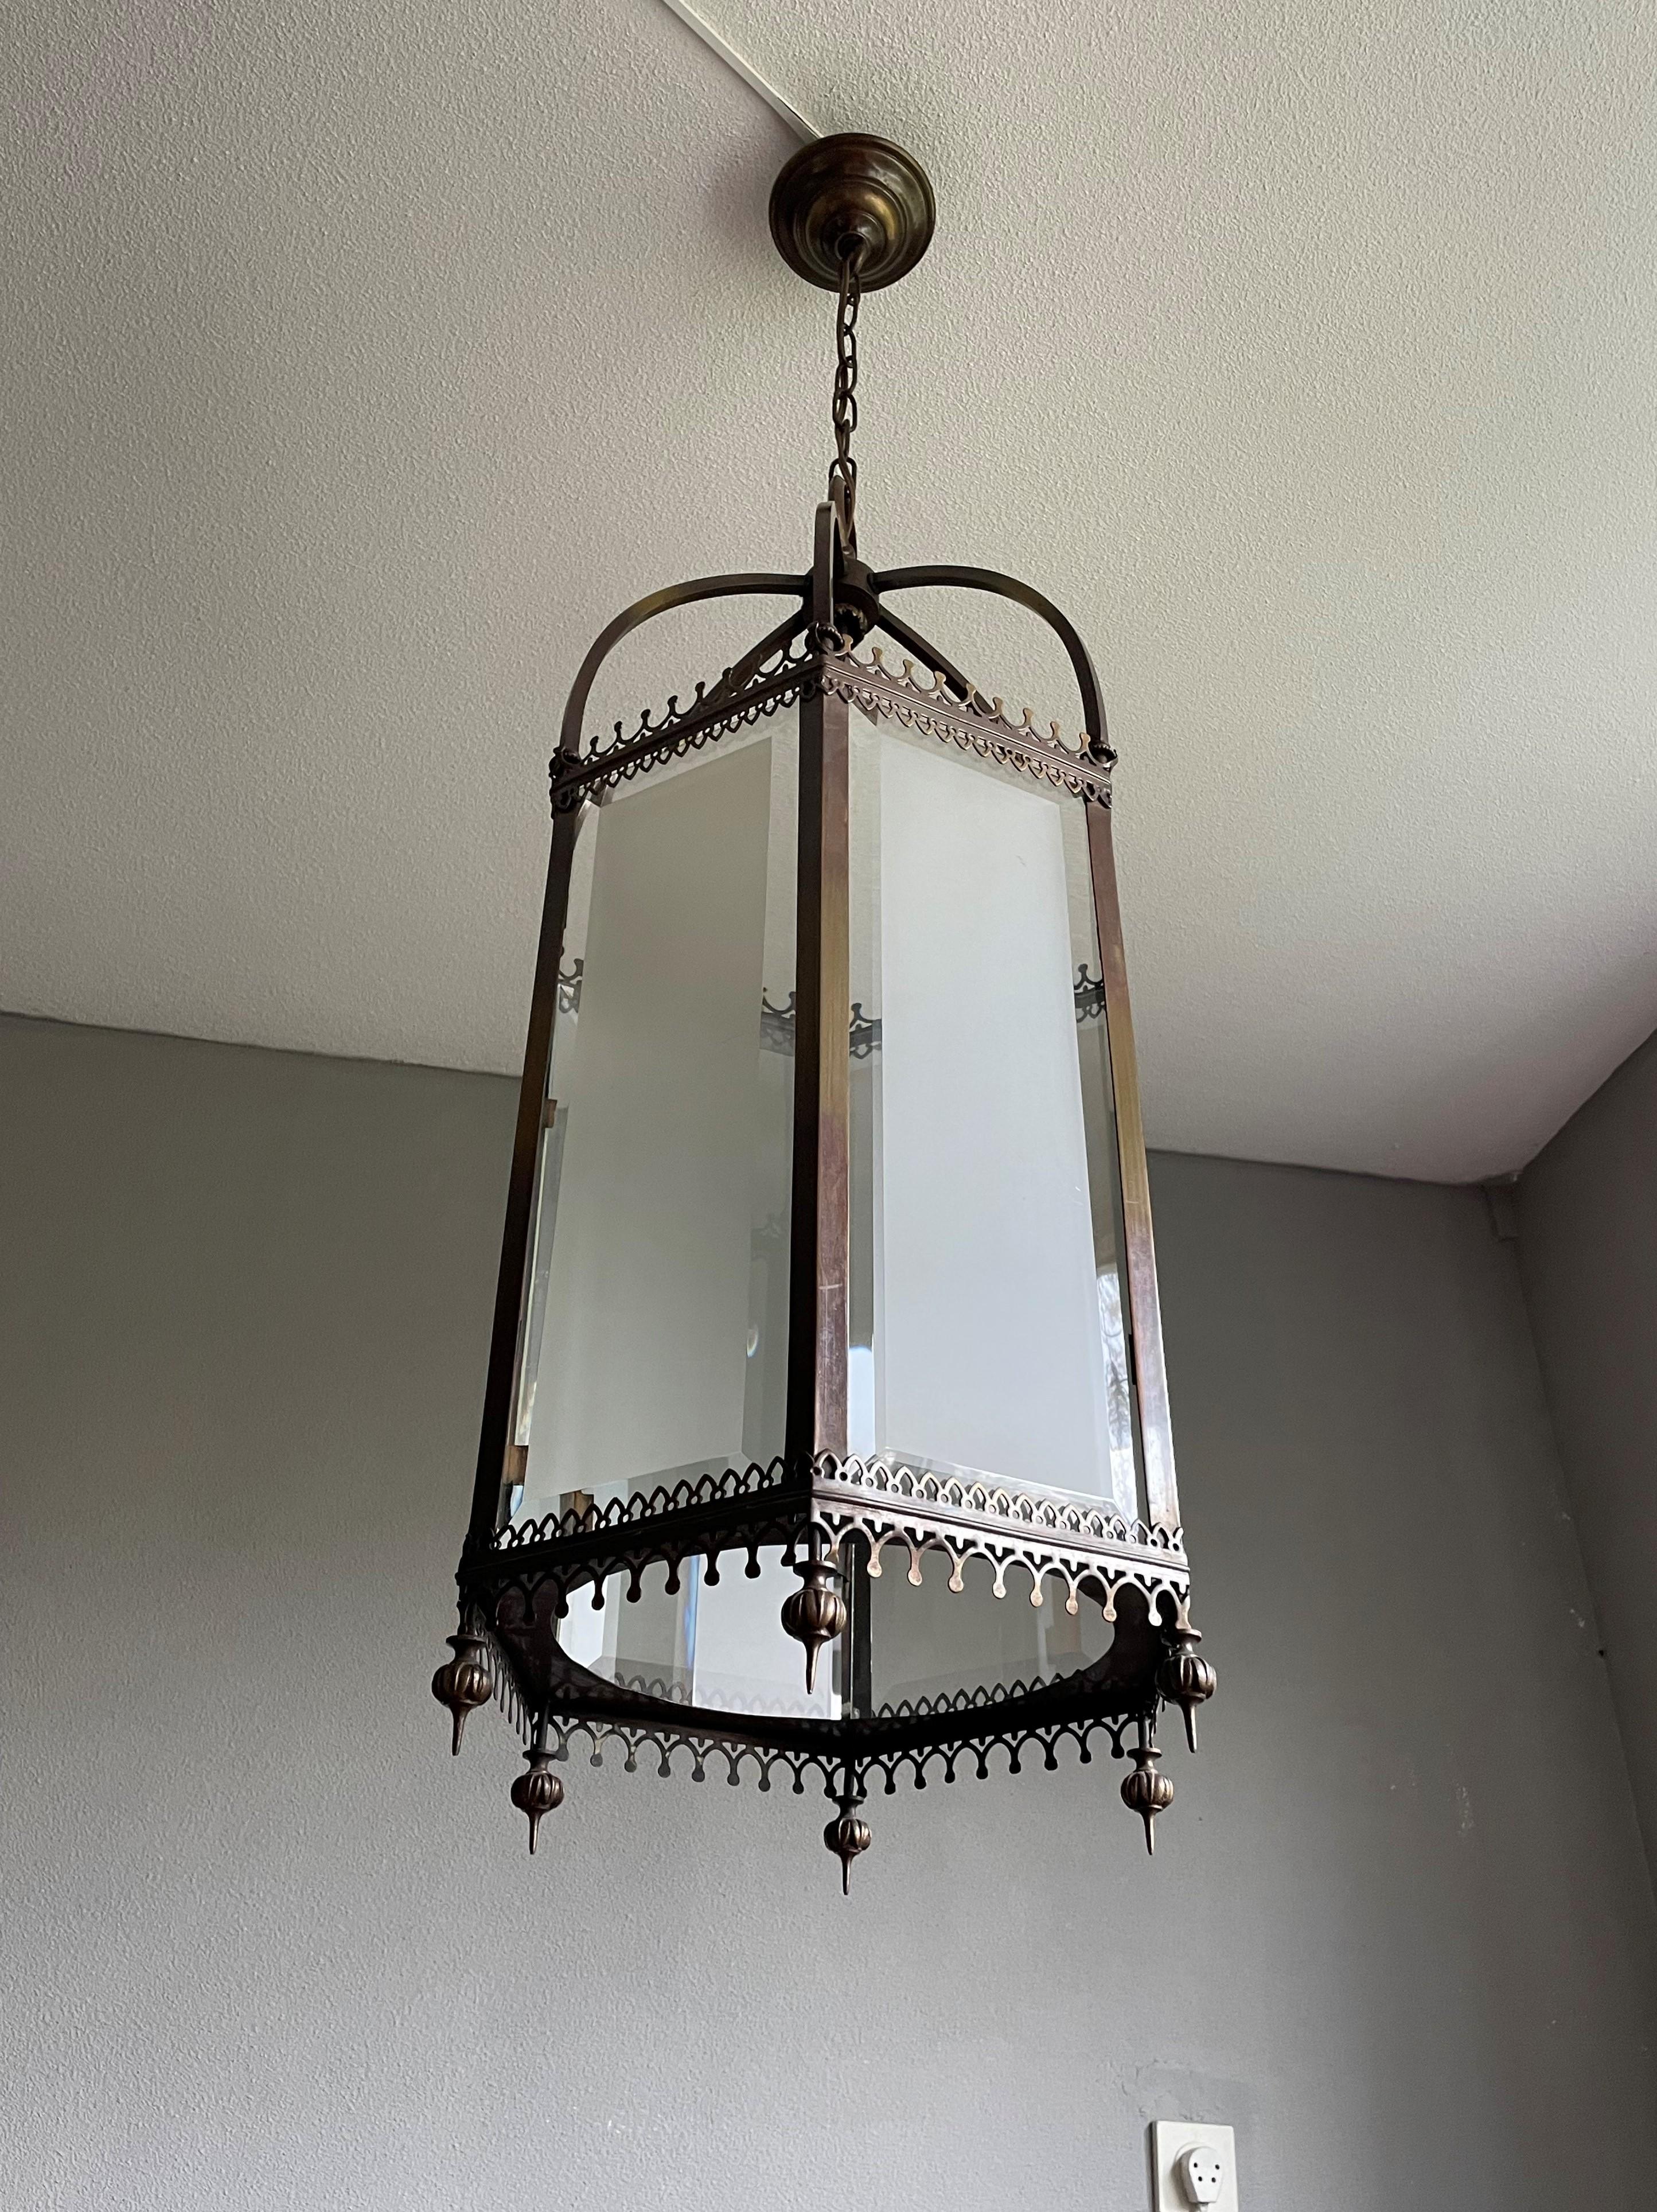 20th Century Antique and Large Gothic Revival Bronze, Brass and Beveled Glass Lantern Pendant